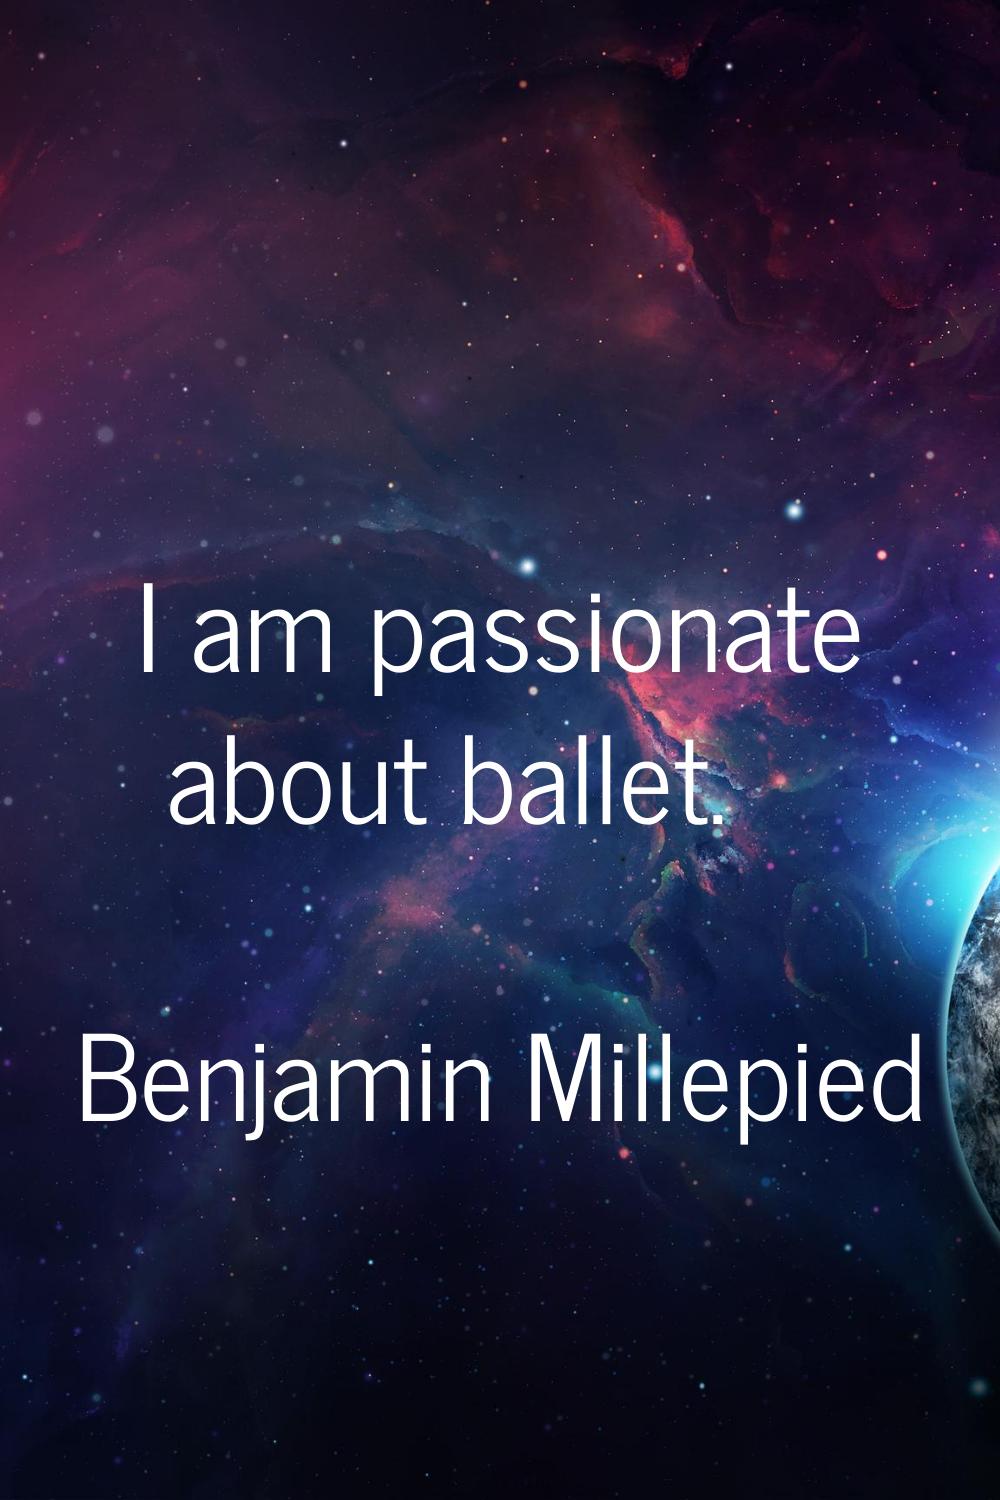 I am passionate about ballet.